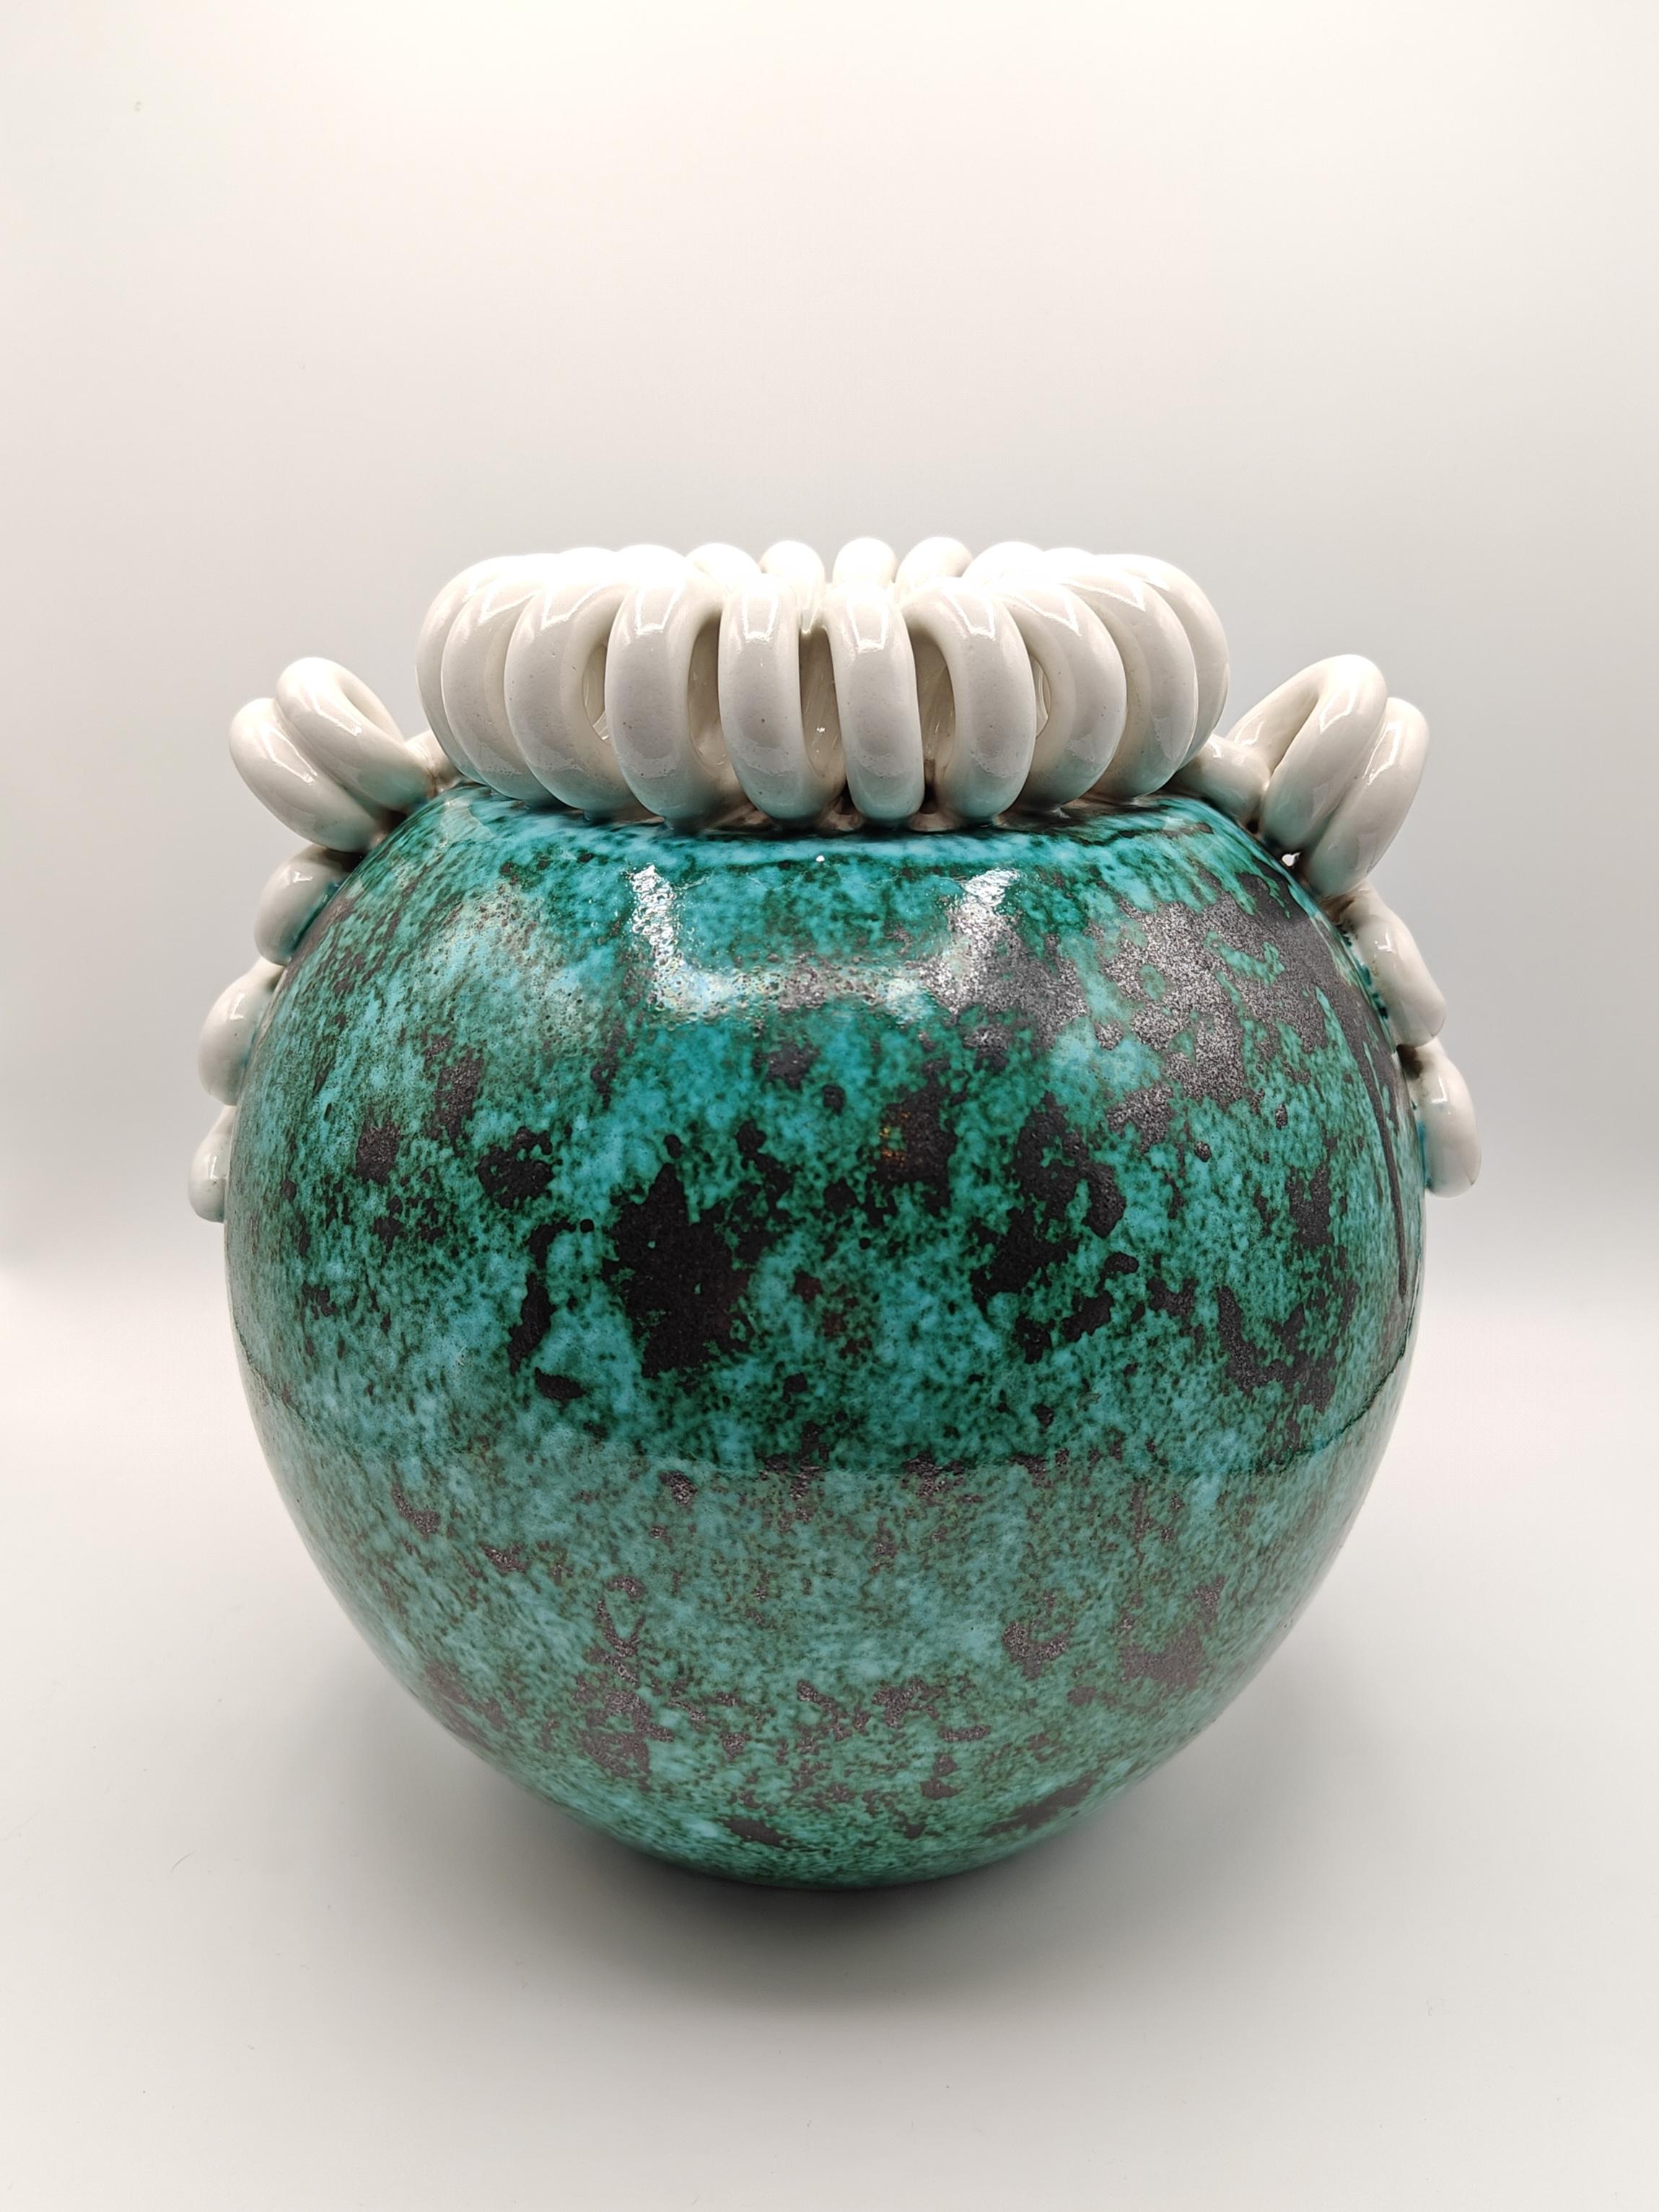 Magnificent enamelled ceramic vase from the 1930s. With a pot-bellied volume, this vase is enamelled with shades of green, from light to dark. 
The top of the vase has this neck in twisted coils, well known from the pottery of Sainte-Radegonde. 
On